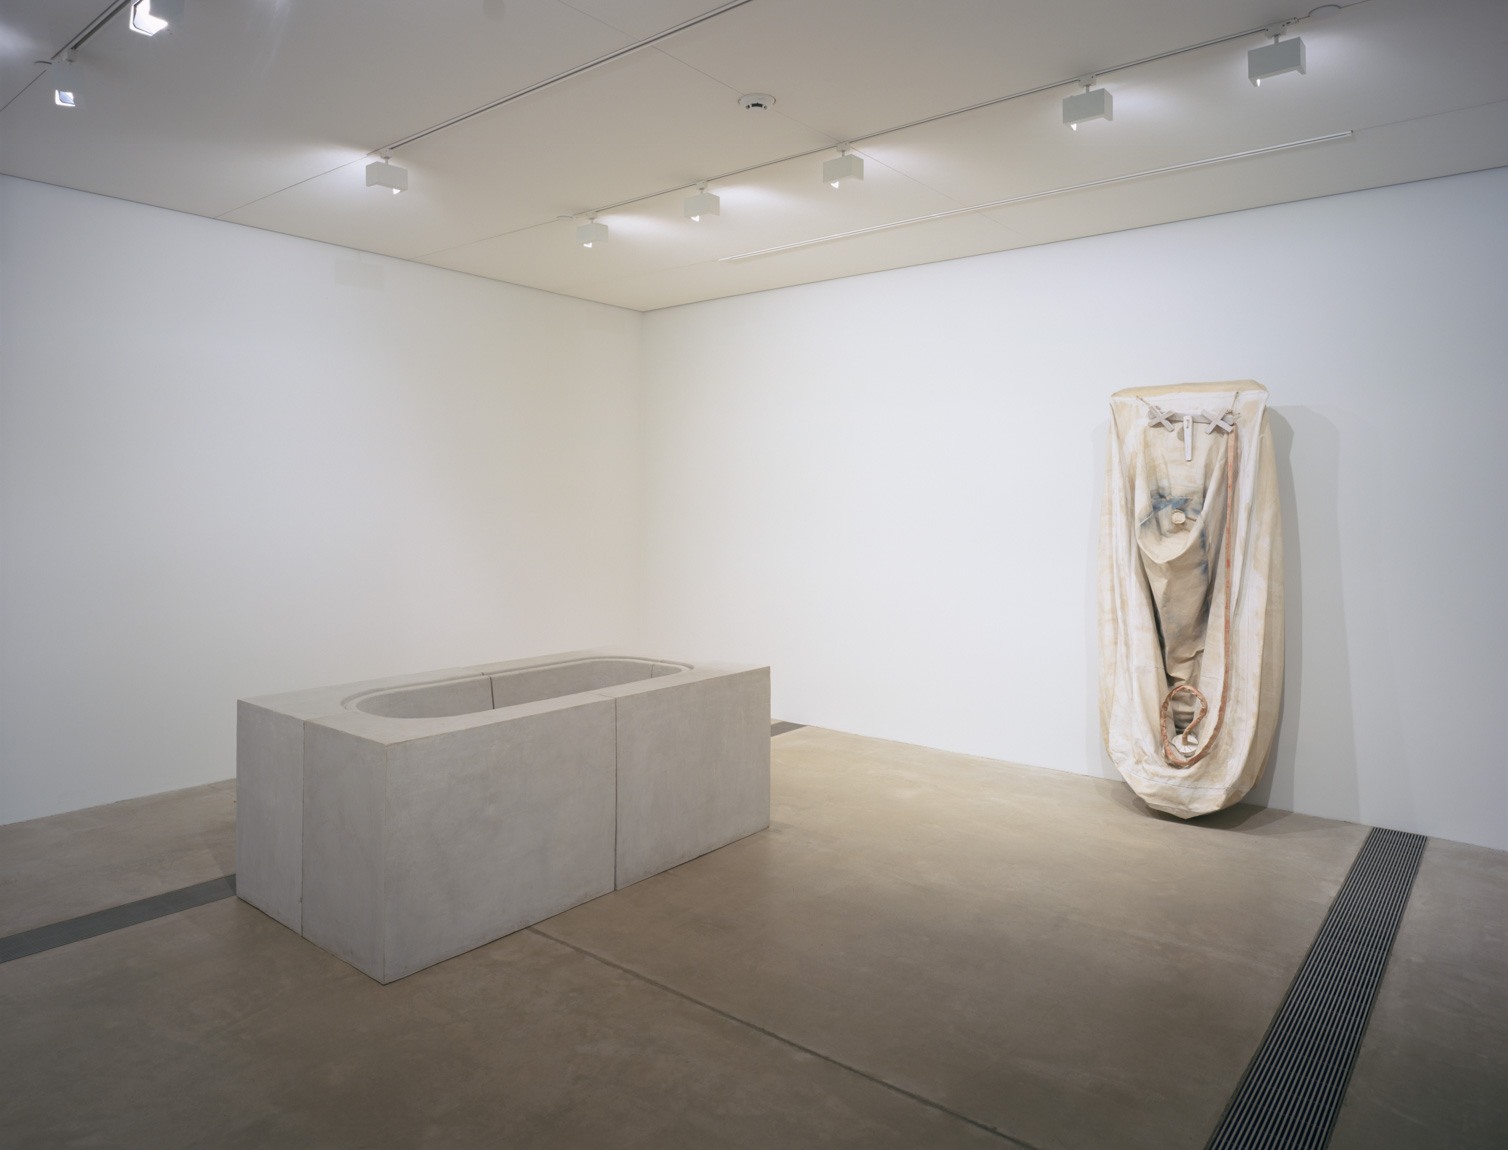 Rachel Whiteread's plaster and glass bath titled "Untitled (Grey)" and Claes Oldenburg's "Soft Bathtub (Model) - Ghost Version," a mass of light fabric hangs on the wall to the right.